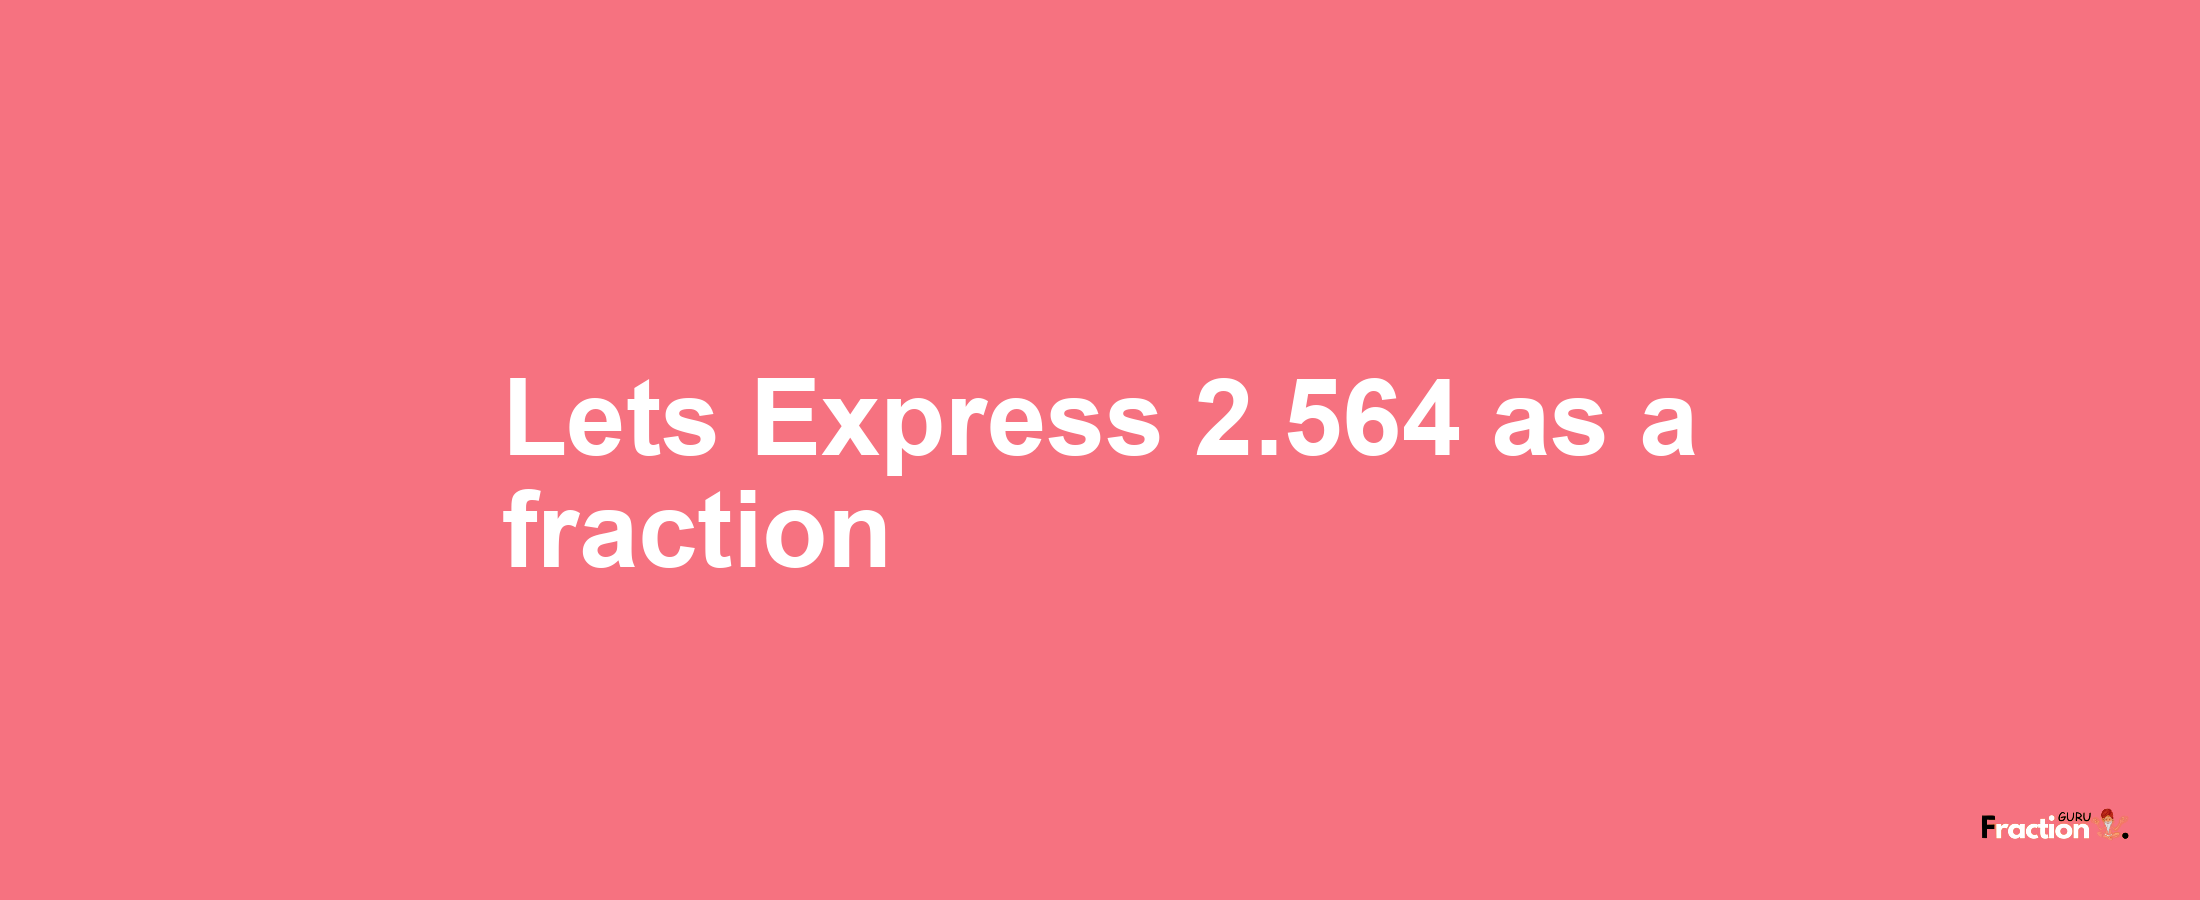 Lets Express 2.564 as afraction